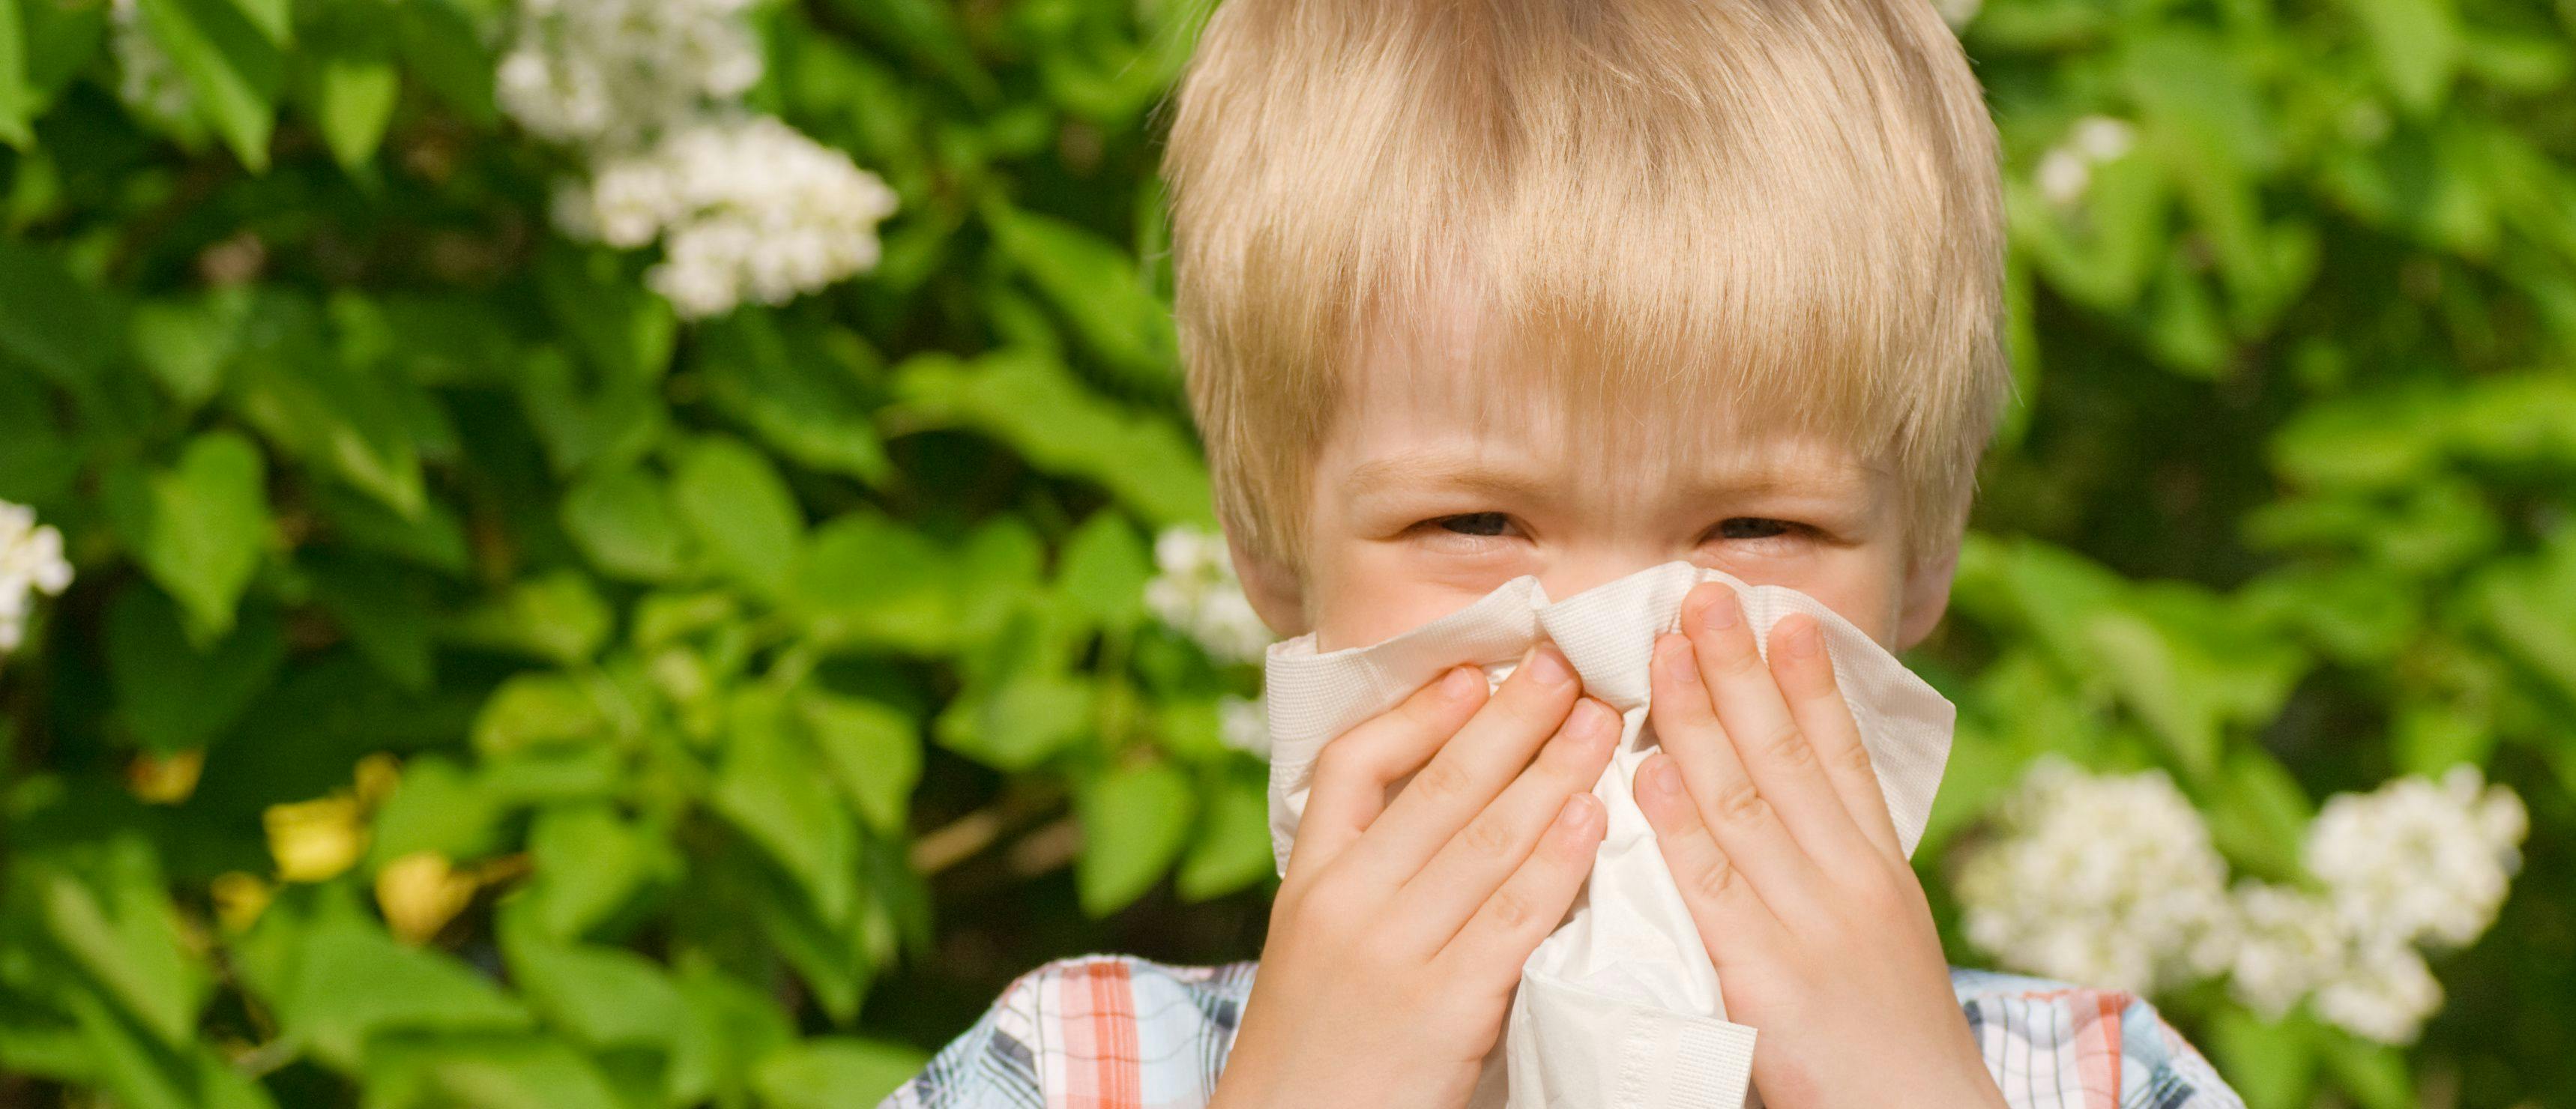 Can Exposing Infants to Allergens Help Reduce Childhood Asthma Risk?